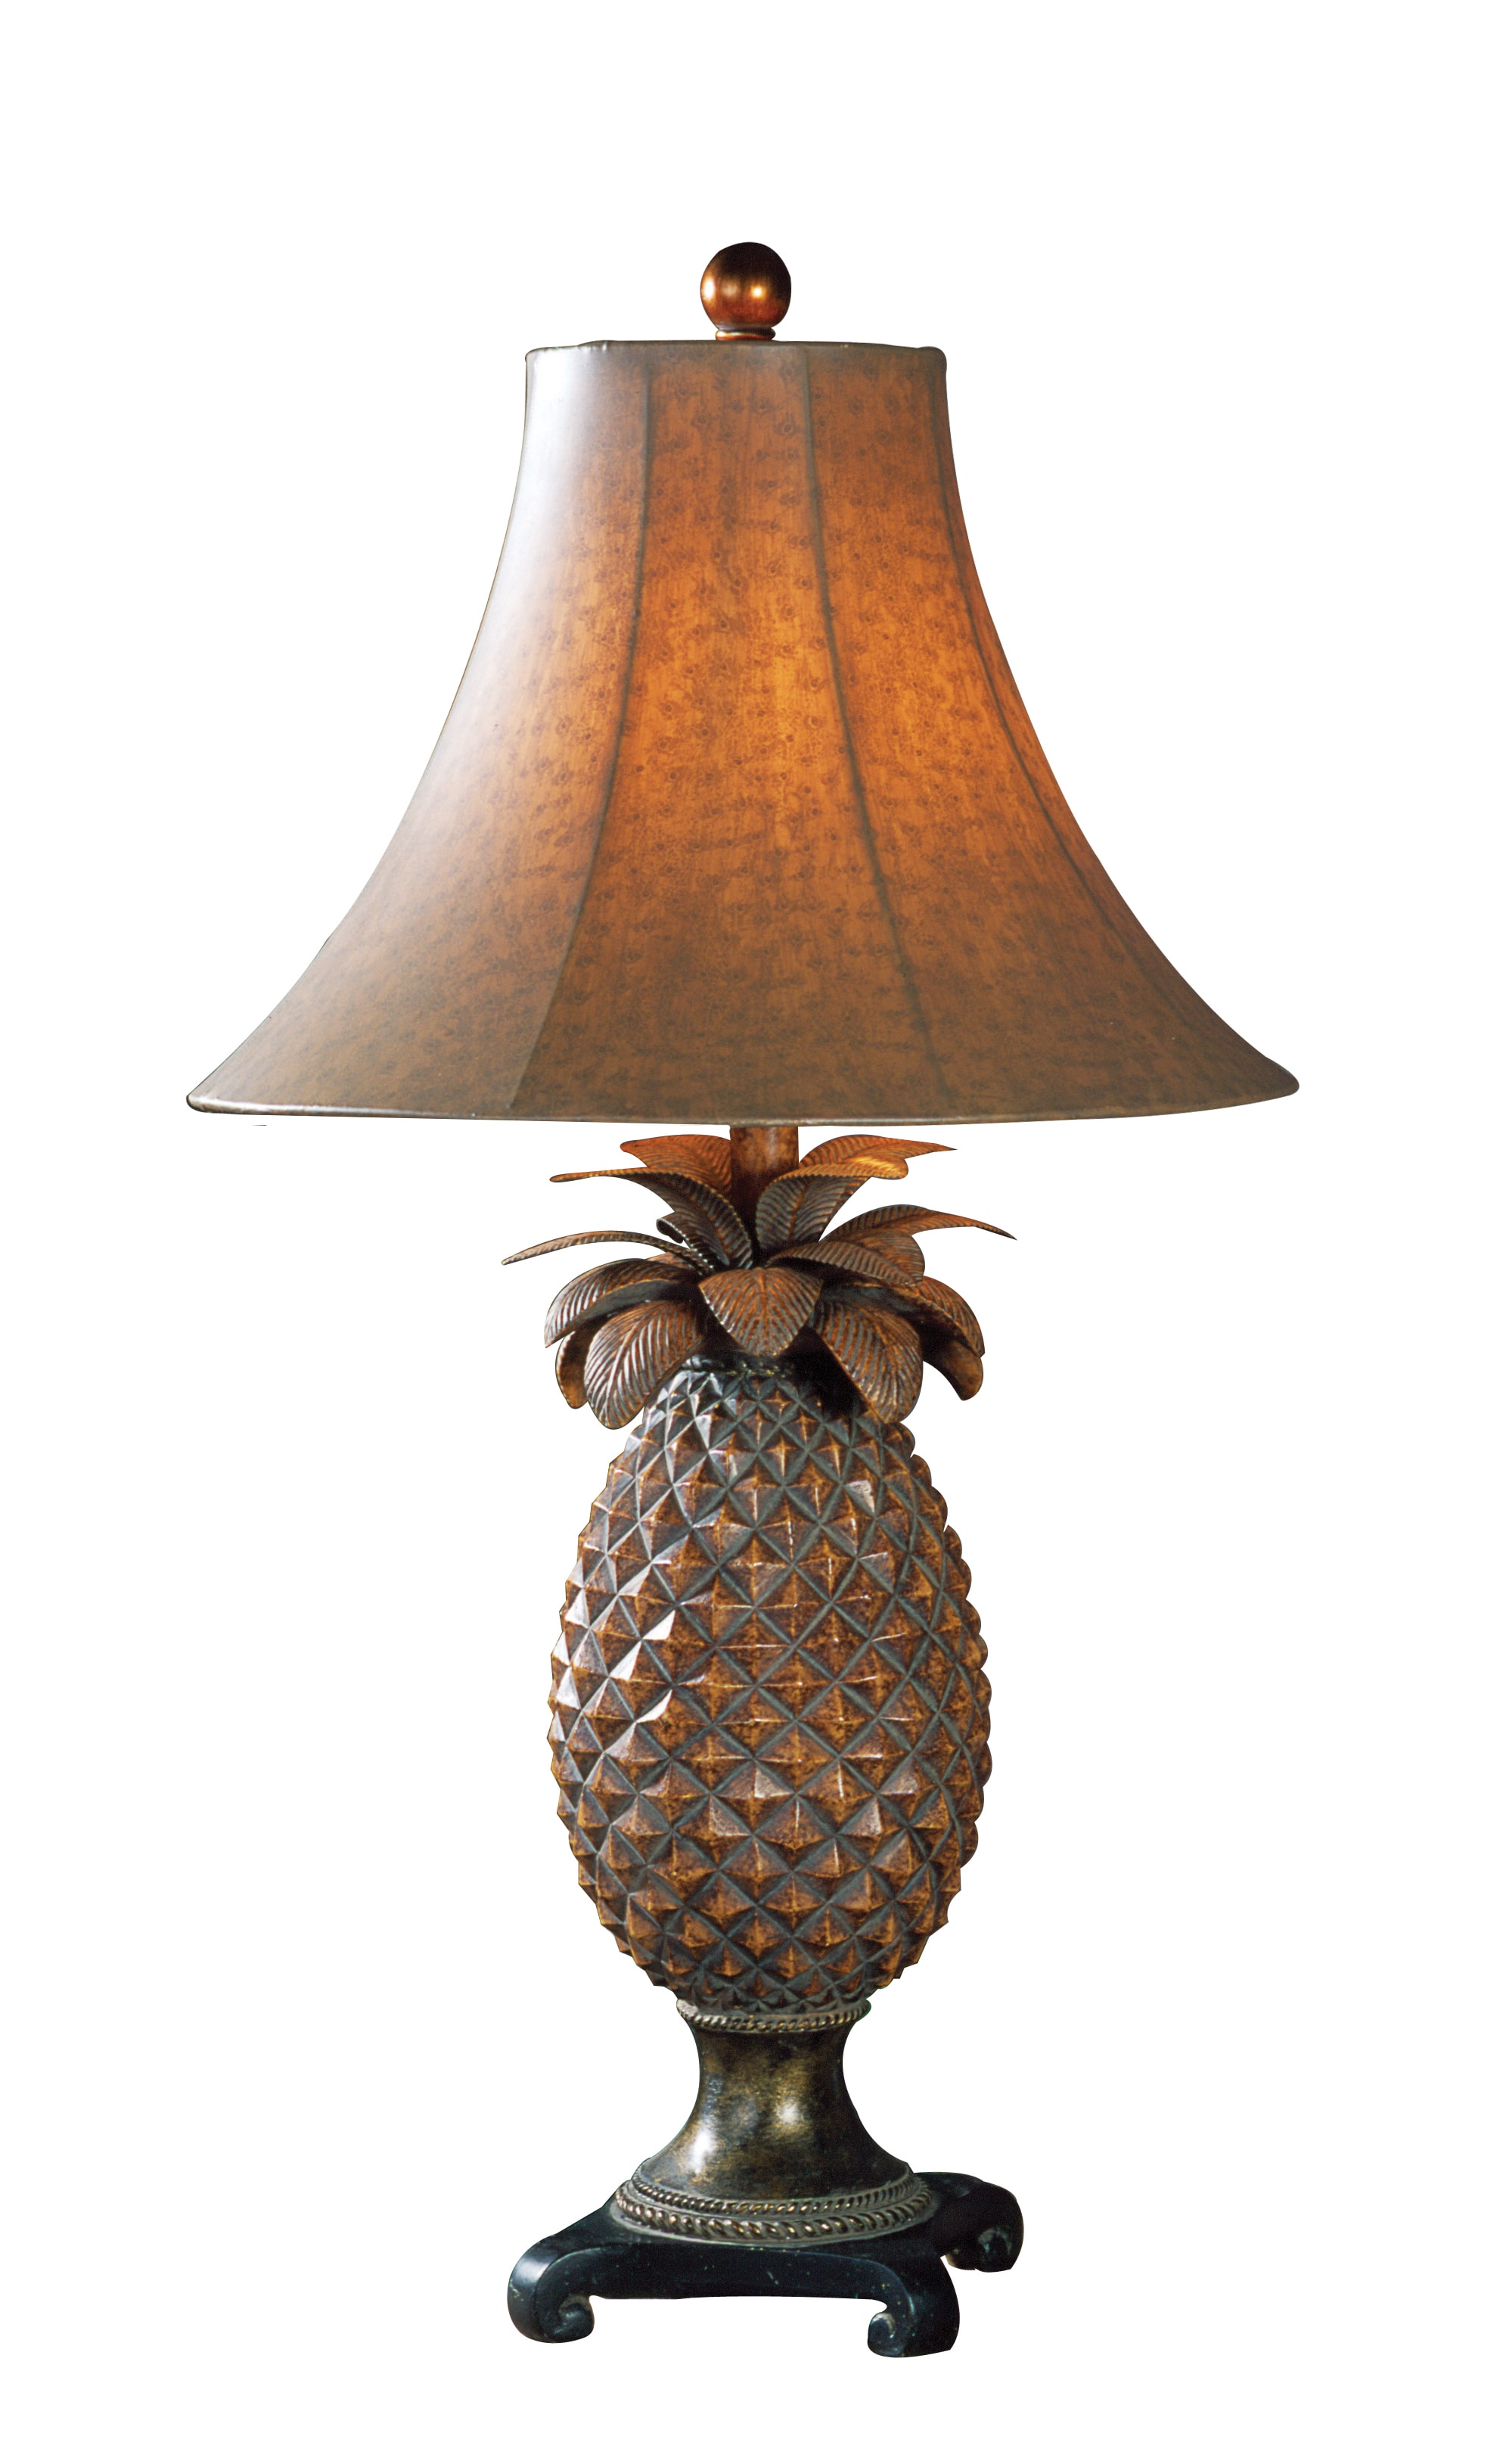 Anana Pineapple Table Lamp 31"H with Ostrich-Textured Shade by Uttermost 27137 